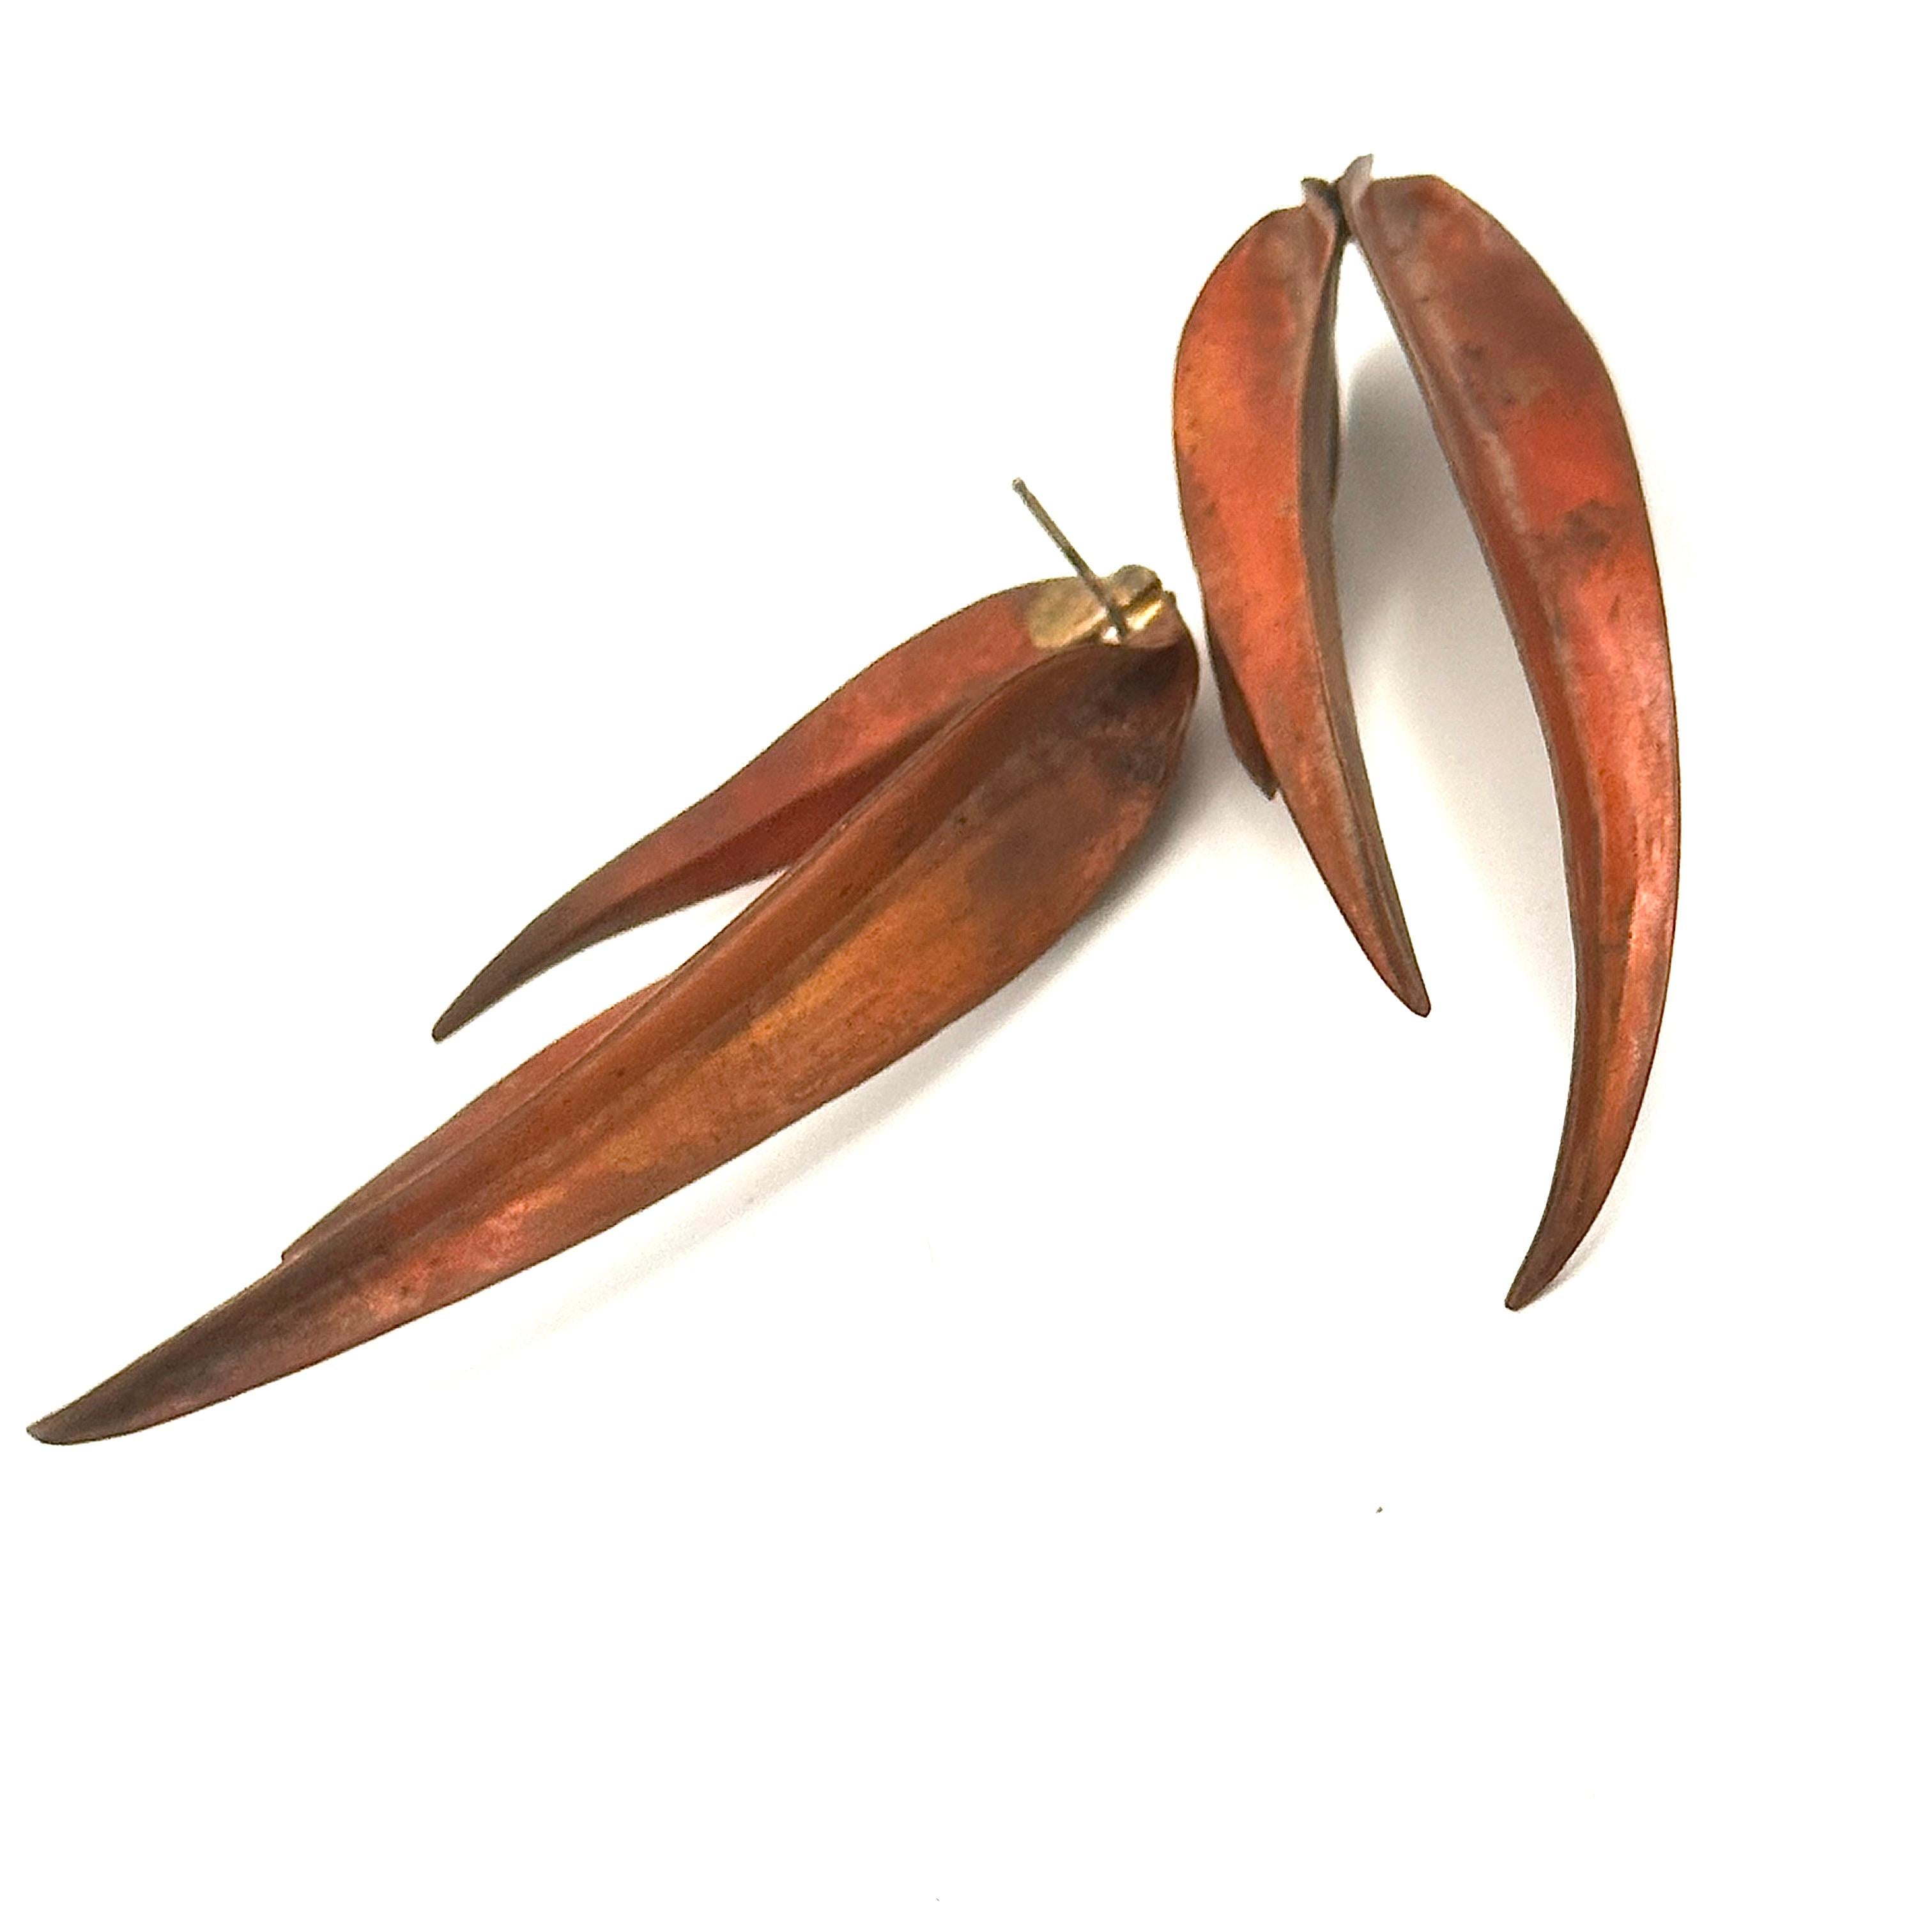 One of the superstar pieces of jewelry Robert Lee Morris created for Calvin Klein's fall 1981 runway show. The theme of long blades of grass, in matte 24k gold and ruddy red copper, or darkened brass. These iconic earrings capture the essence of the